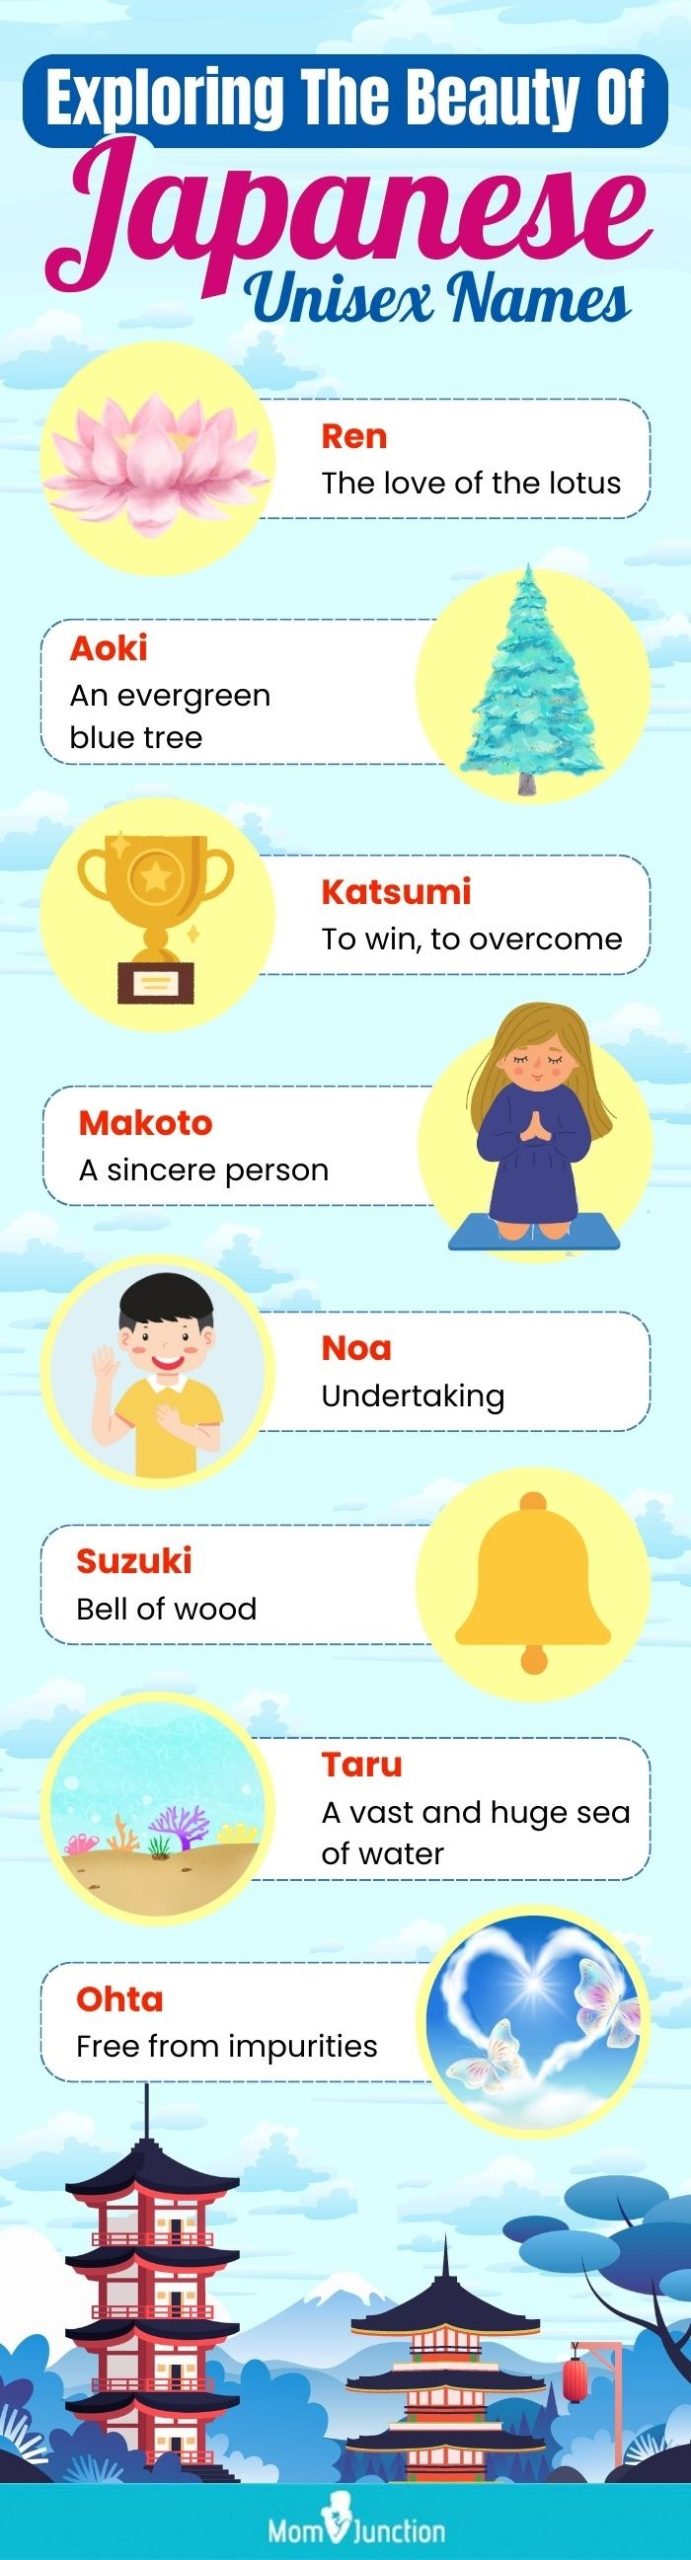 exploring the beauty of japanese unisex names (infographic)